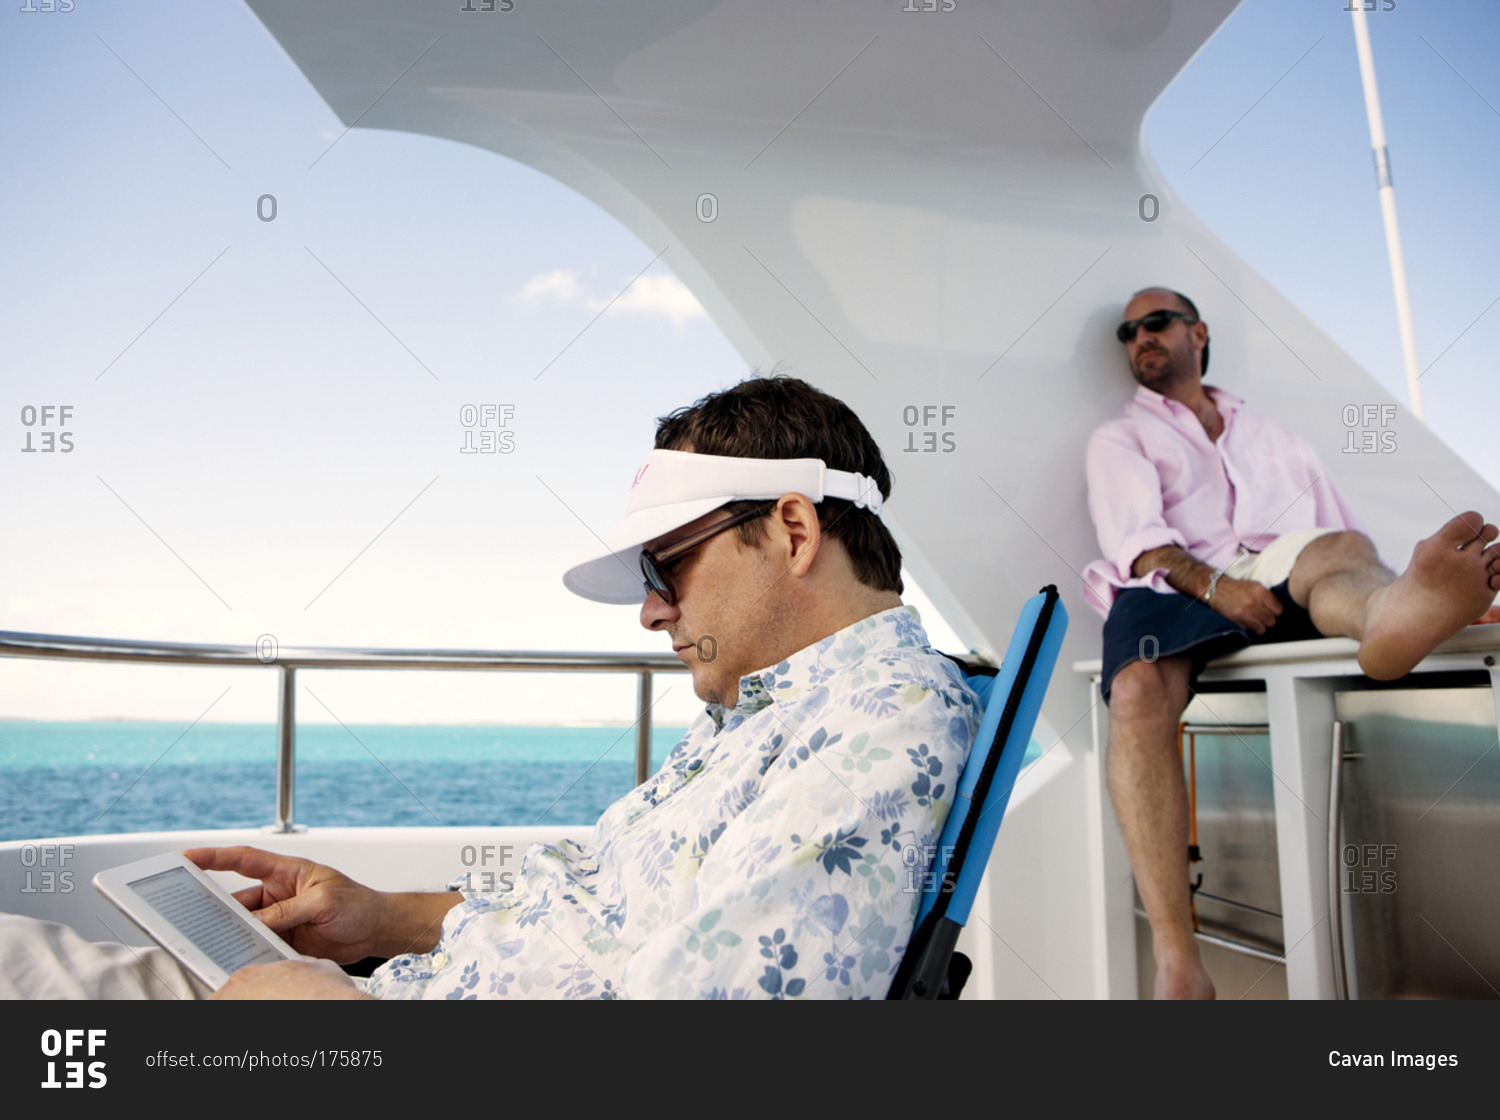 Two men lounge on the deck of a yacht